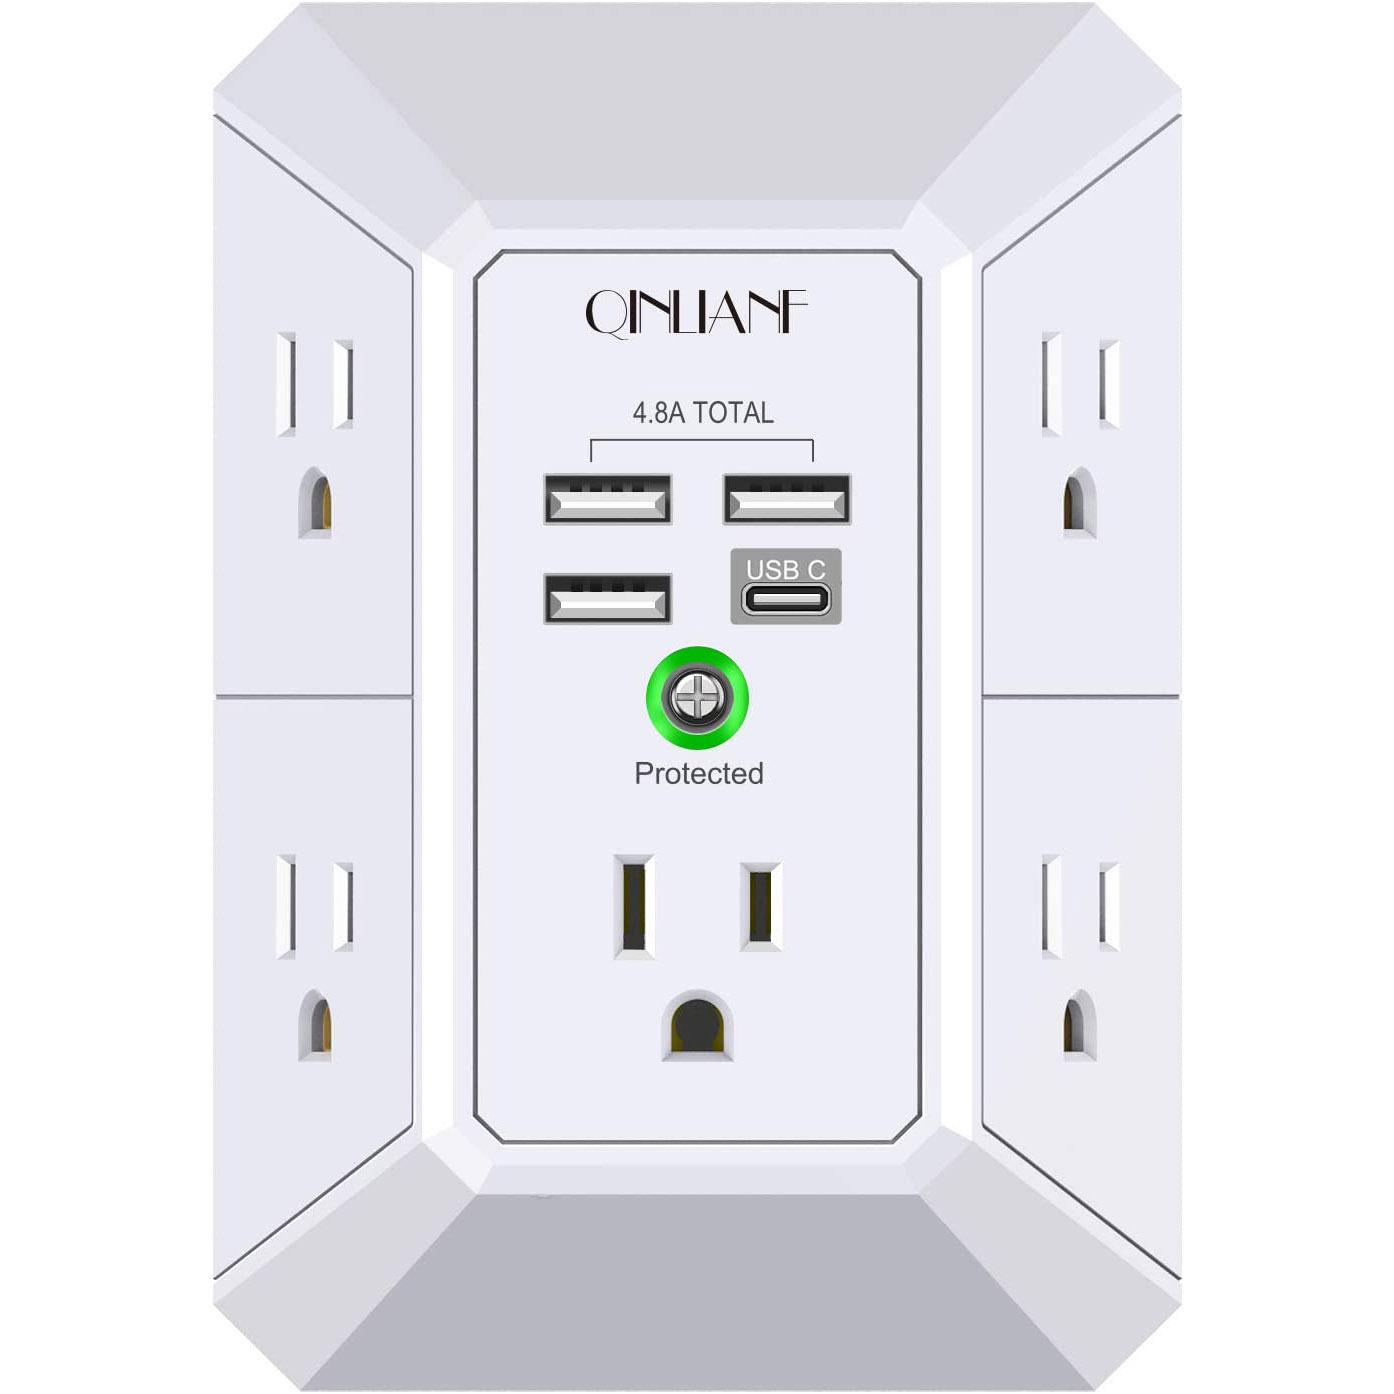 USB Wall Charger Surge Protector for $11.98